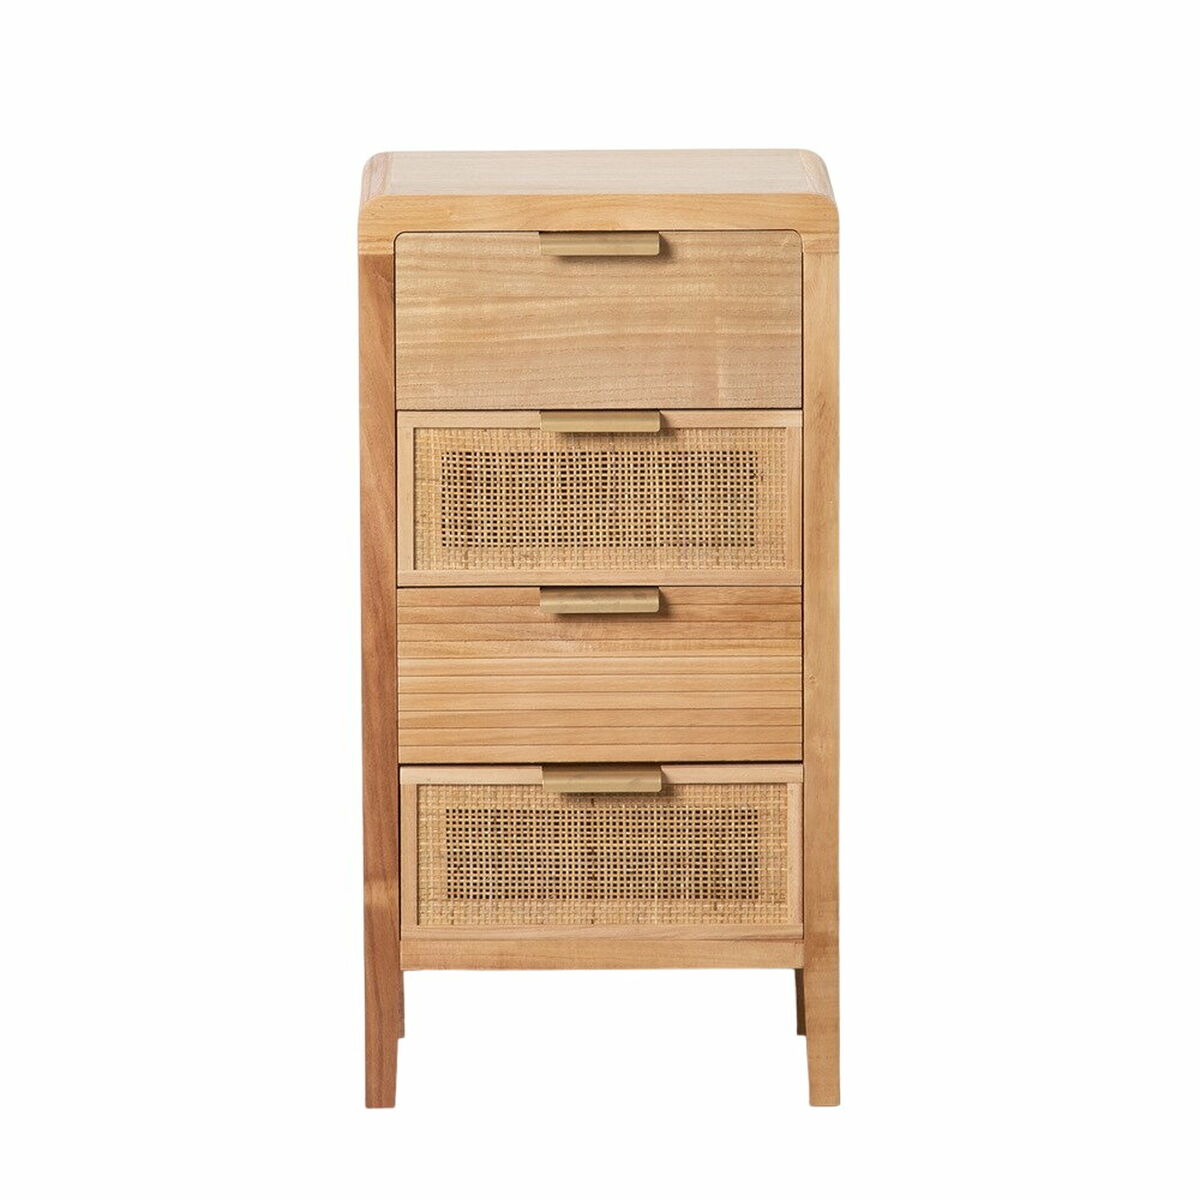 Bedside Table in Paolownia Wood and Rattan with 5 Drawers and Golden Handles (40 x 30 x 77,5 cm)